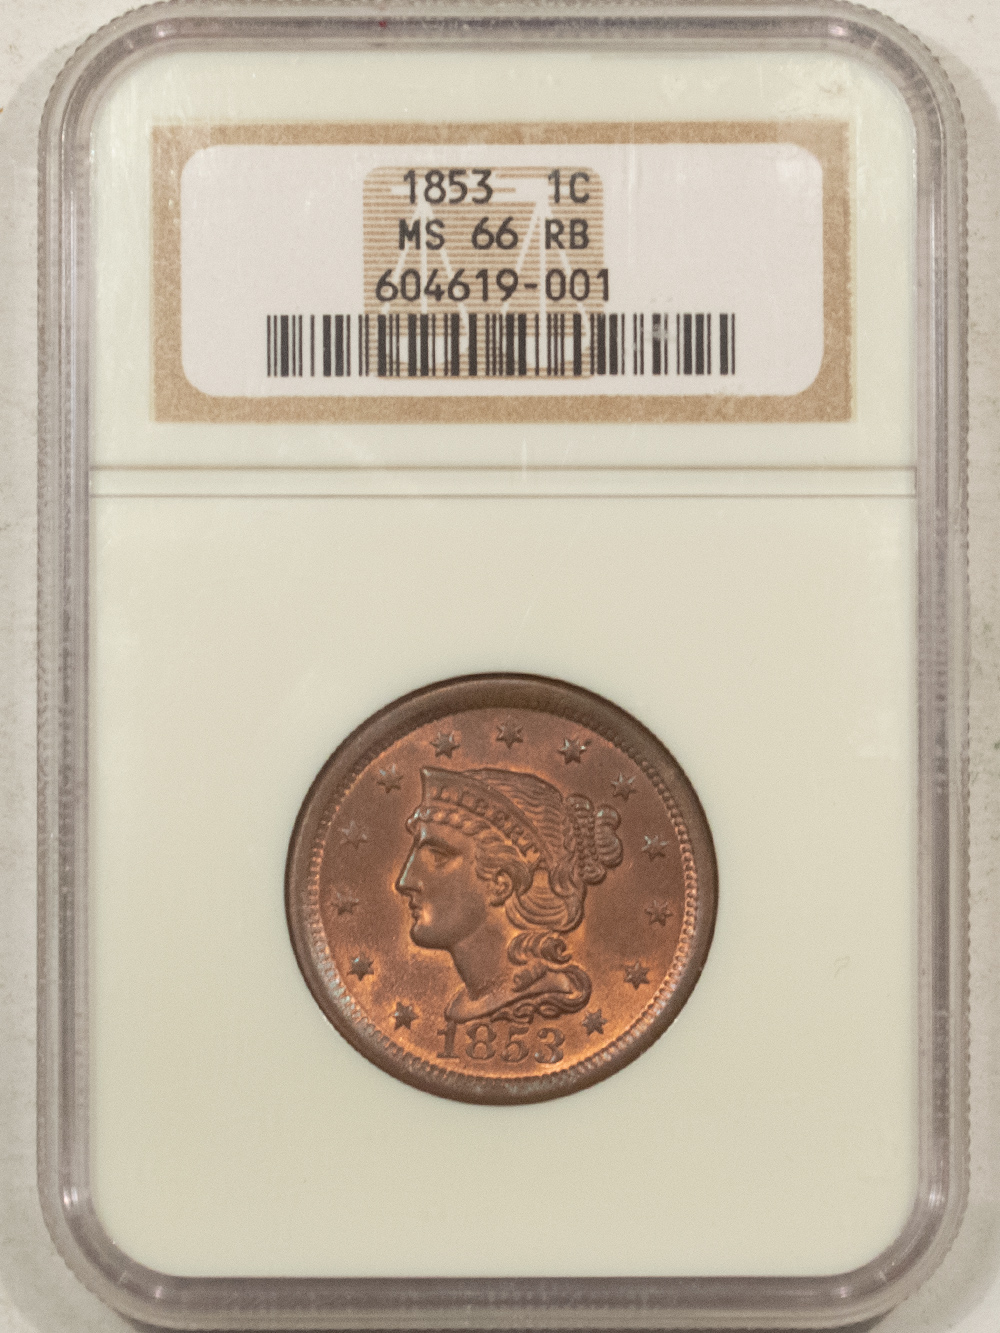 1853 BRAIDED HAIR LARGE CENT - NGC MS-66 RB, SMOOTH & LUSTROUS GEM